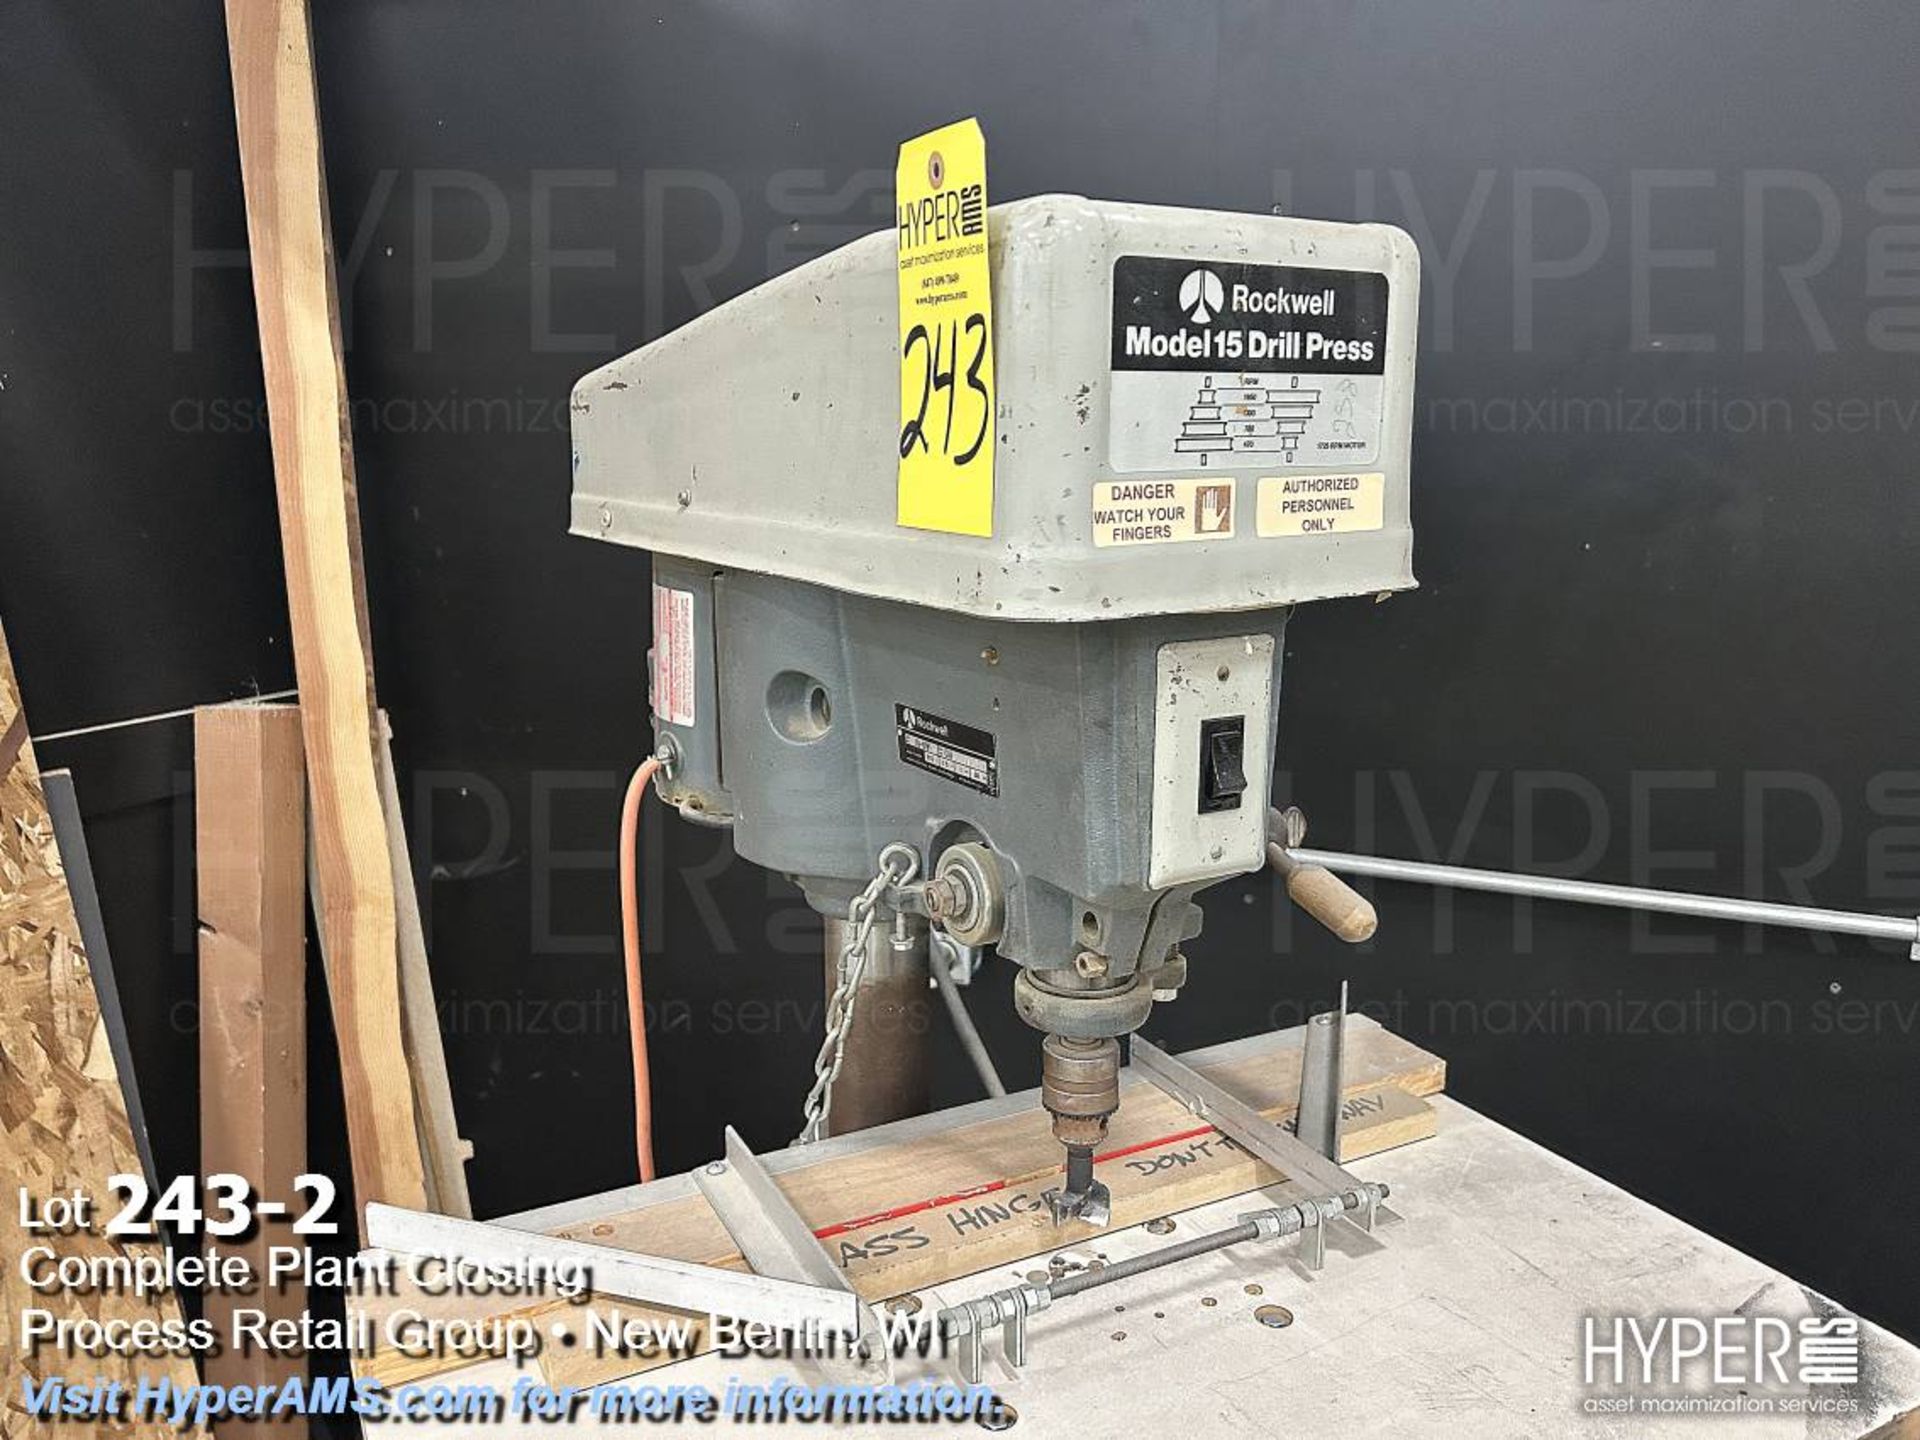 Rockwell 15-091 drill press - Image 2 of 5